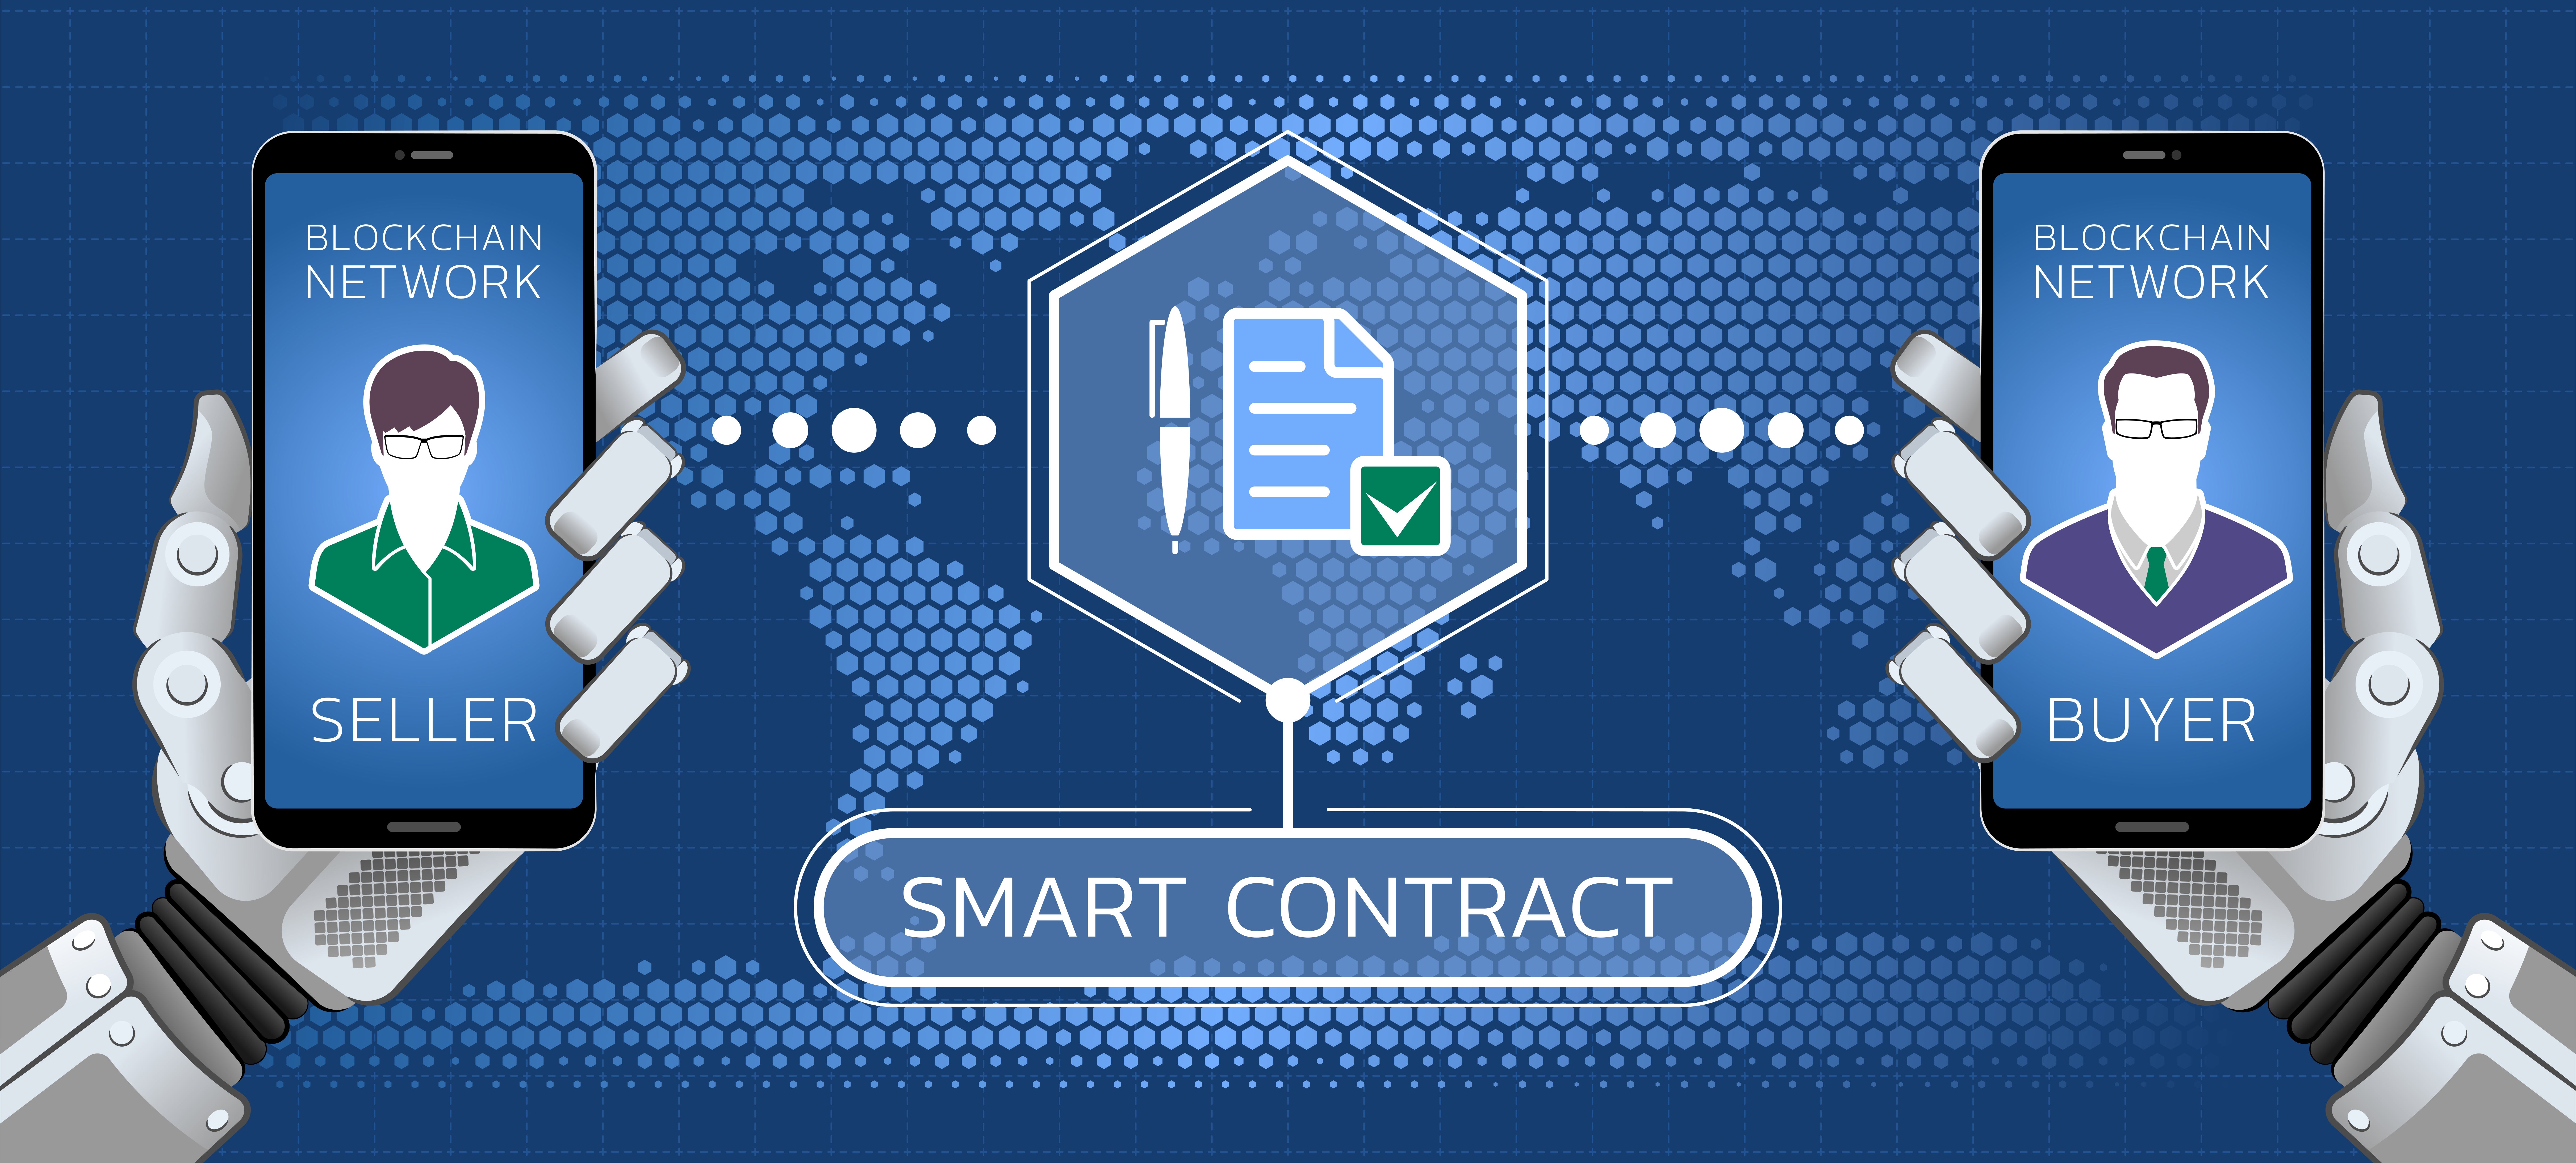 illustration of "smart contract" showing seller blockchain network phone and buyer's, with pen and notepaper in the middle as though connecting like written